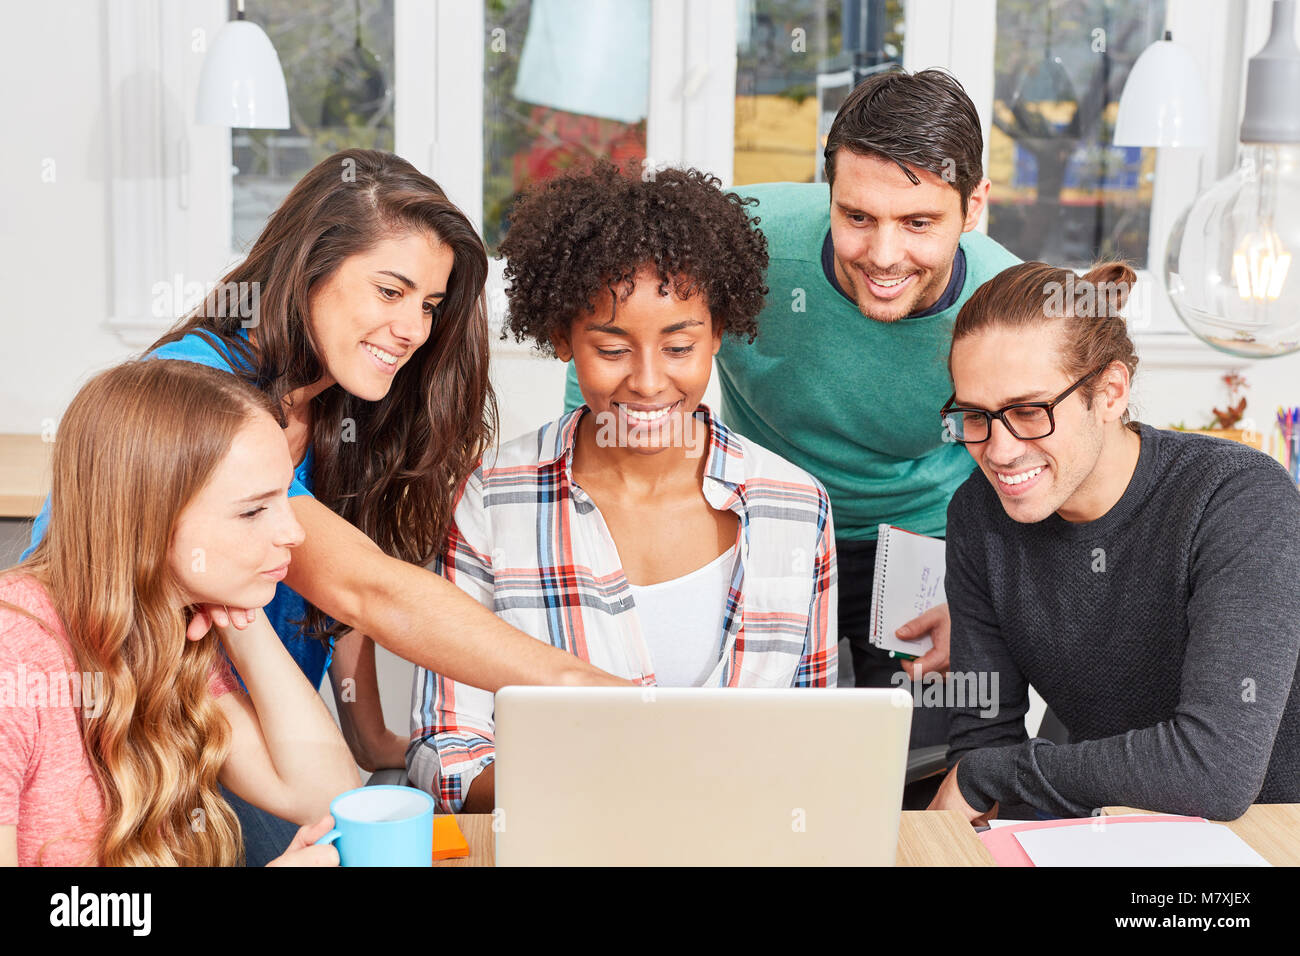 Group of students in business start-up analyzing an idea on a laptop Stock Photo